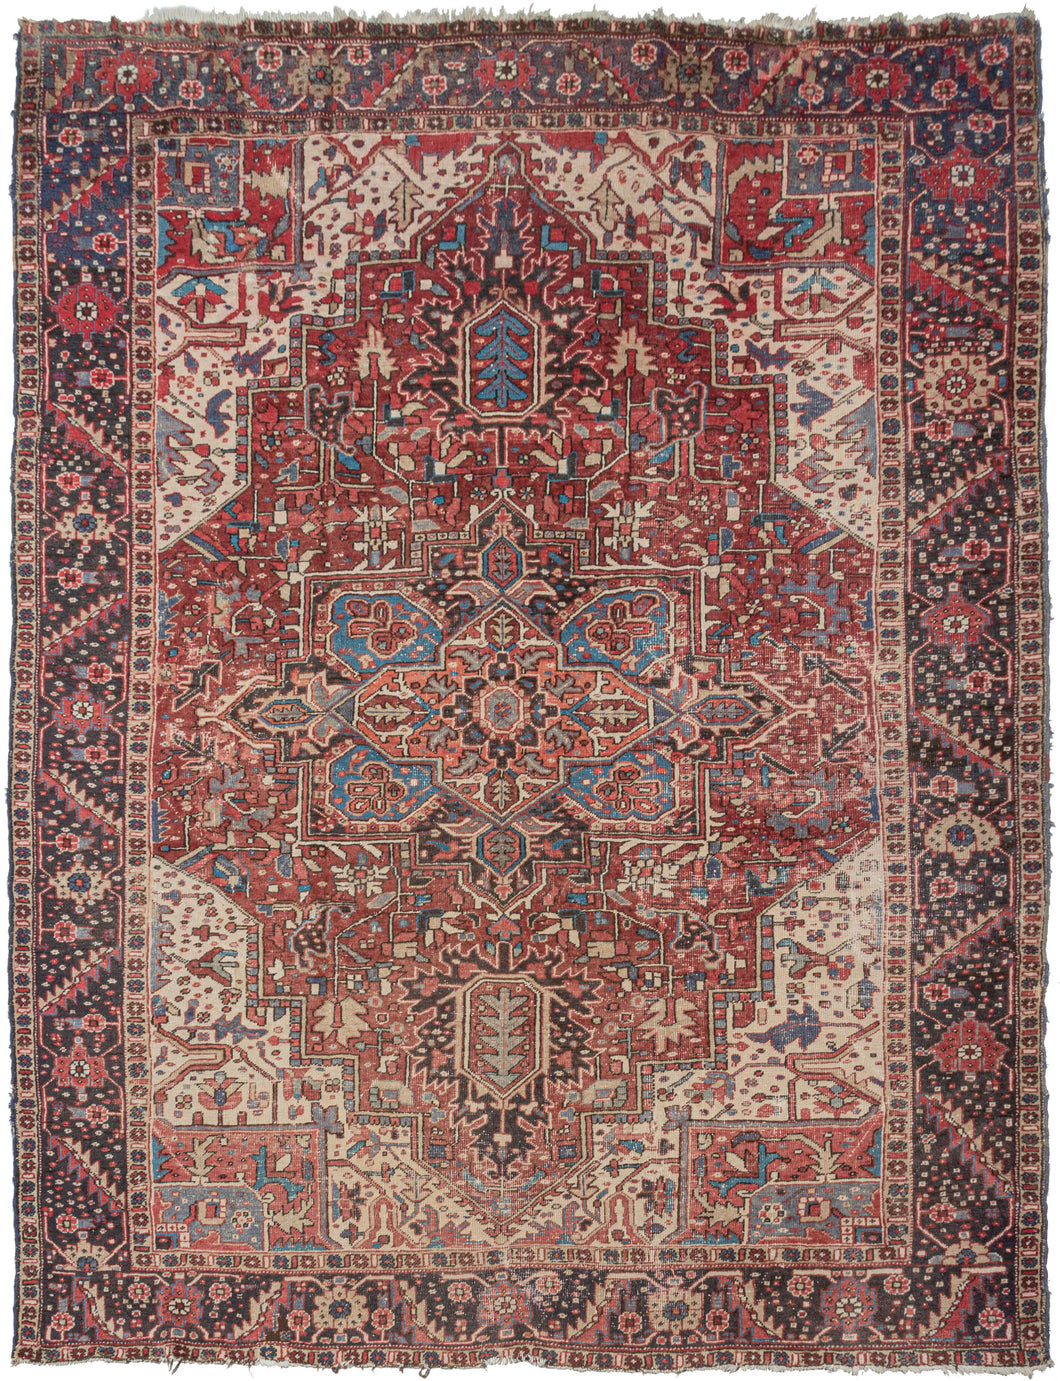 This Heriz rug was handwoven in Northwest Iran during the middle of the 20th century.  This classic Heriz features a geometric central medallion on a faded red ground. The four ivory cornices brighten the composition and the aubergine border adds something a little different .   In good condition, with visible wear throughout which gives the rug an edgy feel.